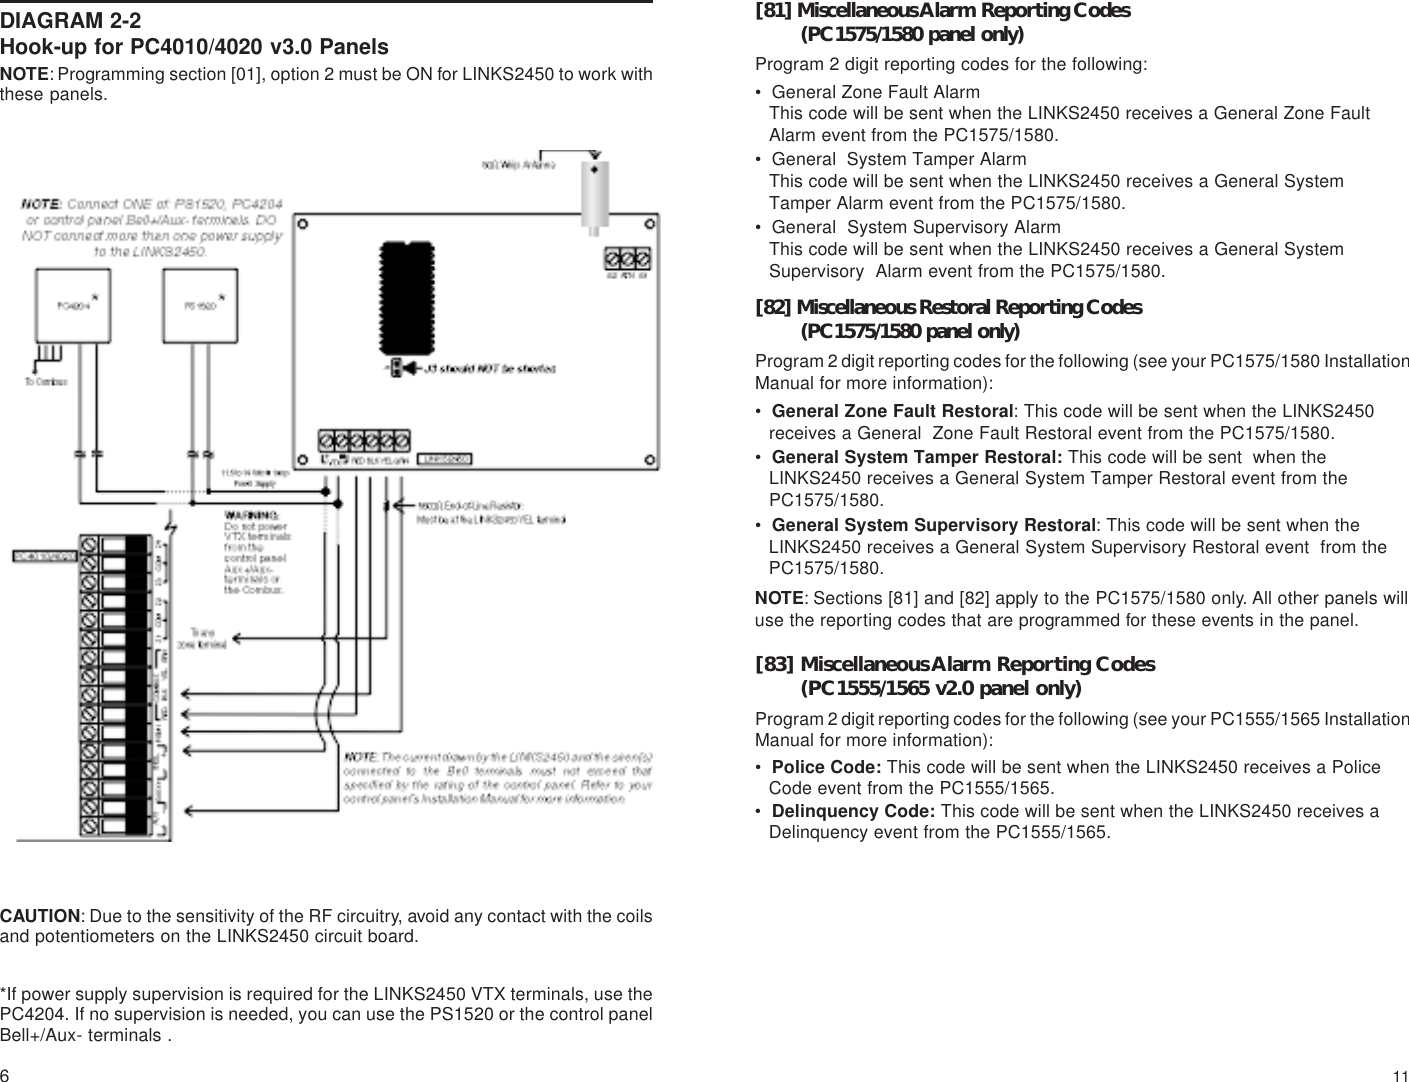 6DIAGRAM 2-2Hook-up for PC4010/4020 v3.0 PanelsCAUTION: Due to the sensitivity of the RF circuitry, avoid any contact with the coilsand potentiometers on the LINKS2450 circuit board.*If power supply supervision is required for the LINKS2450 VTX terminals, use thePC4204. If no supervision is needed, you can use the PS1520 or the control panelBell+/Aux- terminals .NOTE: Programming section [01], option 2 must be ON for LINKS2450 to work withthese panels.11[81] Miscellaneous Alarm Reporting Codes(PC1575/1580 panel only)Program 2 digit reporting codes for the following:• General Zone Fault AlarmThis code will be sent when the LINKS2450 receives a General Zone FaultAlarm event from the PC1575/1580.• General  System Tamper AlarmThis code will be sent when the LINKS2450 receives a General SystemTamper Alarm event from the PC1575/1580.• General  System Supervisory AlarmThis code will be sent when the LINKS2450 receives a General SystemSupervisory  Alarm event from the PC1575/1580.[82] Miscellaneous Restoral Reporting Codes(PC1575/1580 panel only)Program 2 digit reporting codes for the following (see your PC1575/1580 InstallationManual for more information):•General Zone Fault Restoral: This code will be sent when the LINKS2450receives a General  Zone Fault Restoral event from the PC1575/1580.•General System Tamper Restoral: This code will be sent  when theLINKS2450 receives a General System Tamper Restoral event from thePC1575/1580.•General System Supervisory Restoral: This code will be sent when theLINKS2450 receives a General System Supervisory Restoral event  from thePC1575/1580.NOTE: Sections [81] and [82] apply to the PC1575/1580 only. All other panels willuse the reporting codes that are programmed for these events in the panel.[83] Miscellaneous Alarm Reporting Codes(PC1555/1565 v2.0 panel only)Program 2 digit reporting codes for the following (see your PC1555/1565 InstallationManual for more information):•Police Code: This code will be sent when the LINKS2450 receives a PoliceCode event from the PC1555/1565.•Delinquency Code: This code will be sent when the LINKS2450 receives aDelinquency event from the PC1555/1565.